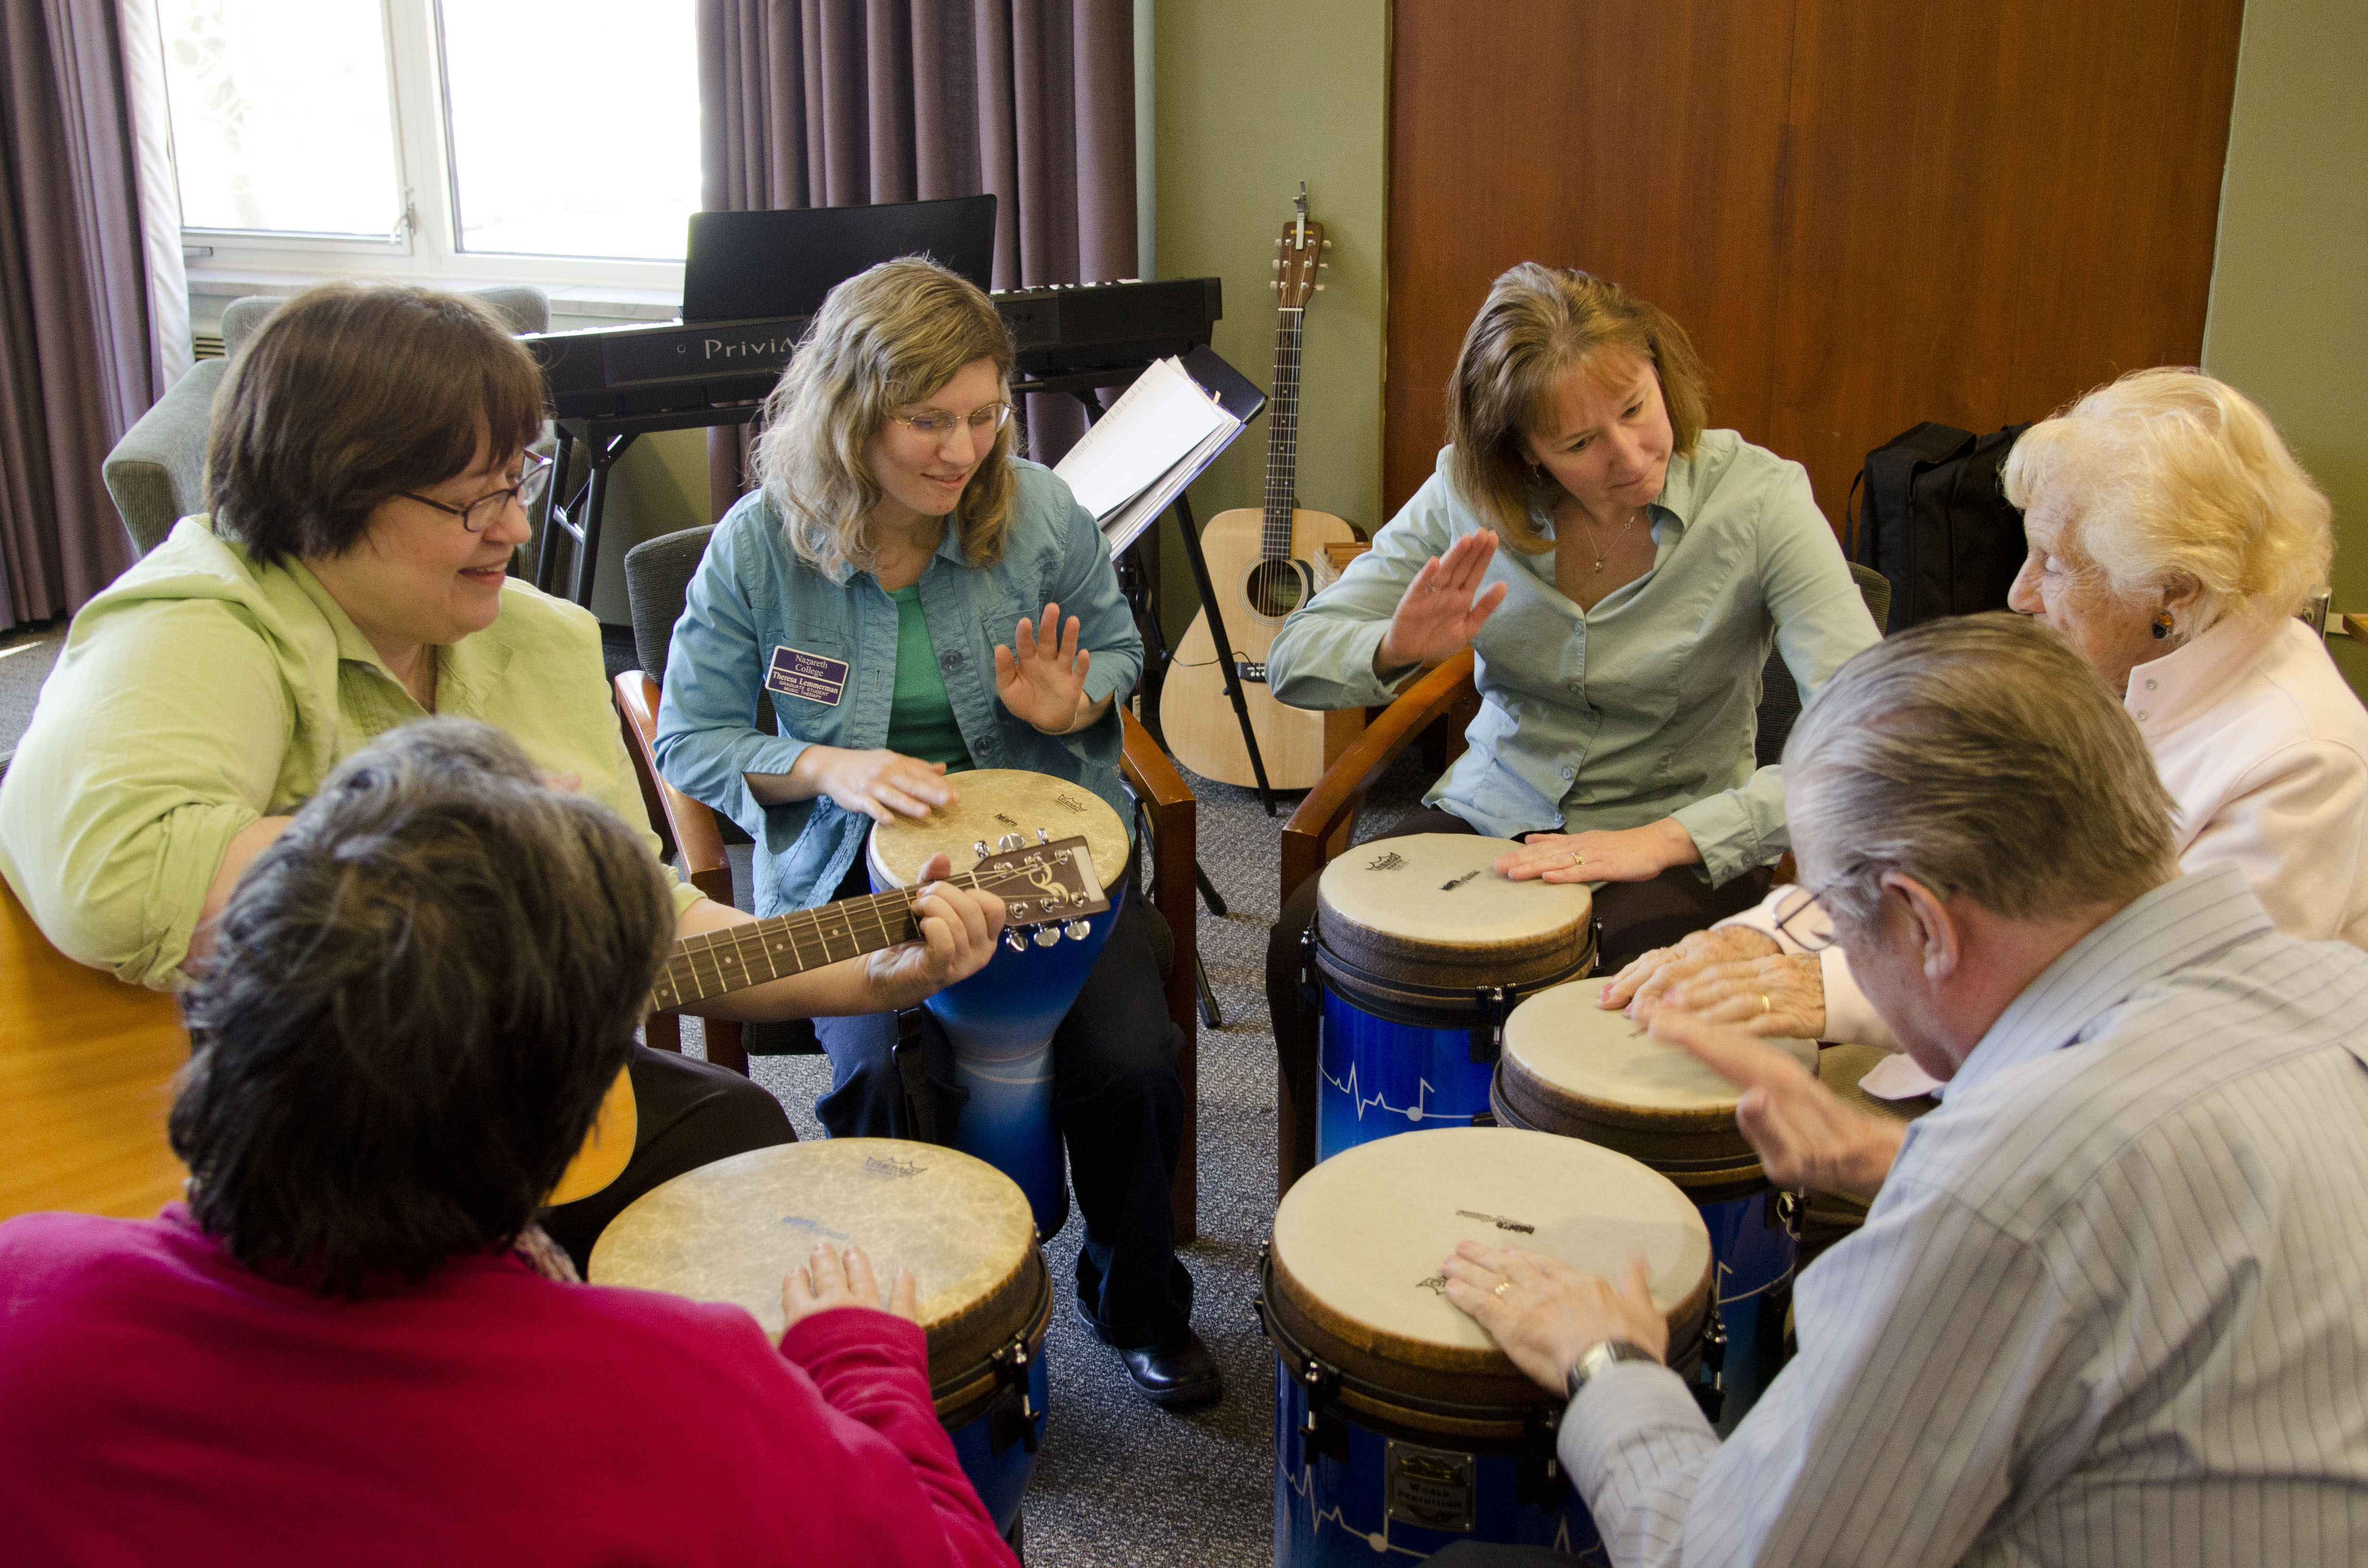 Group music therapy may help Alzheimer's patients